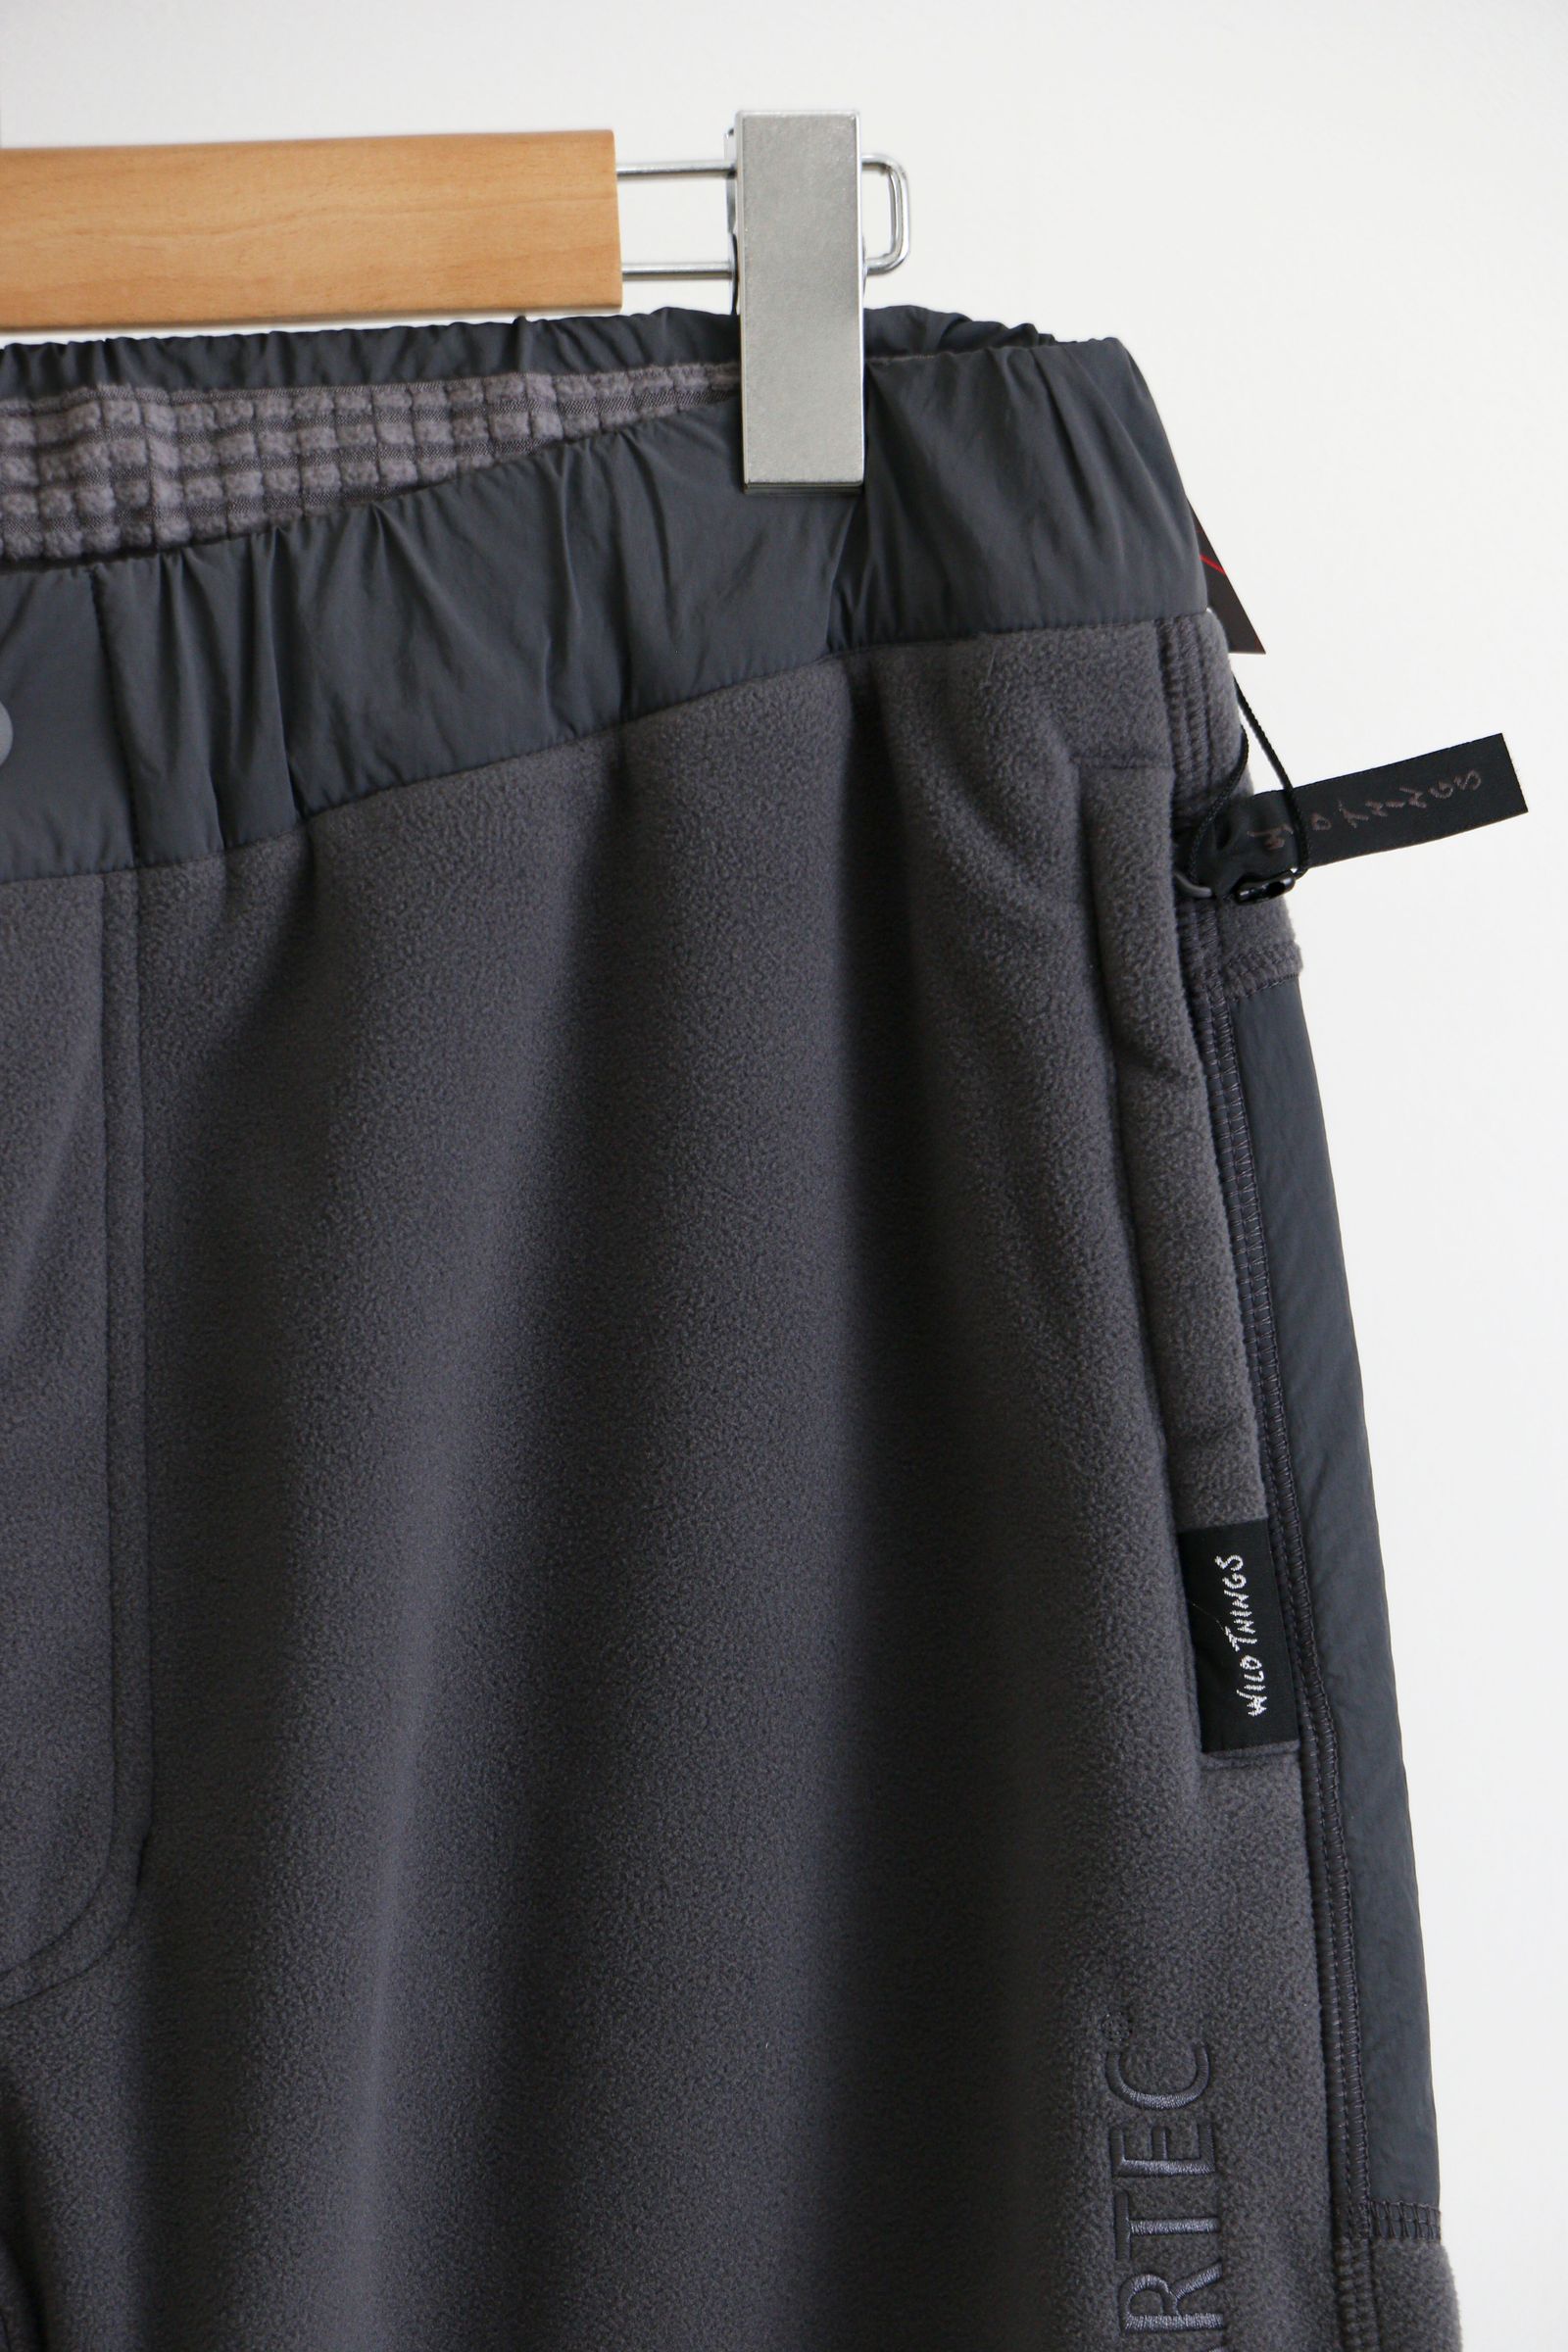 WILD THINGS - POLARTEC Wind Pro COMFY PANTS / GREY / ポーラテック